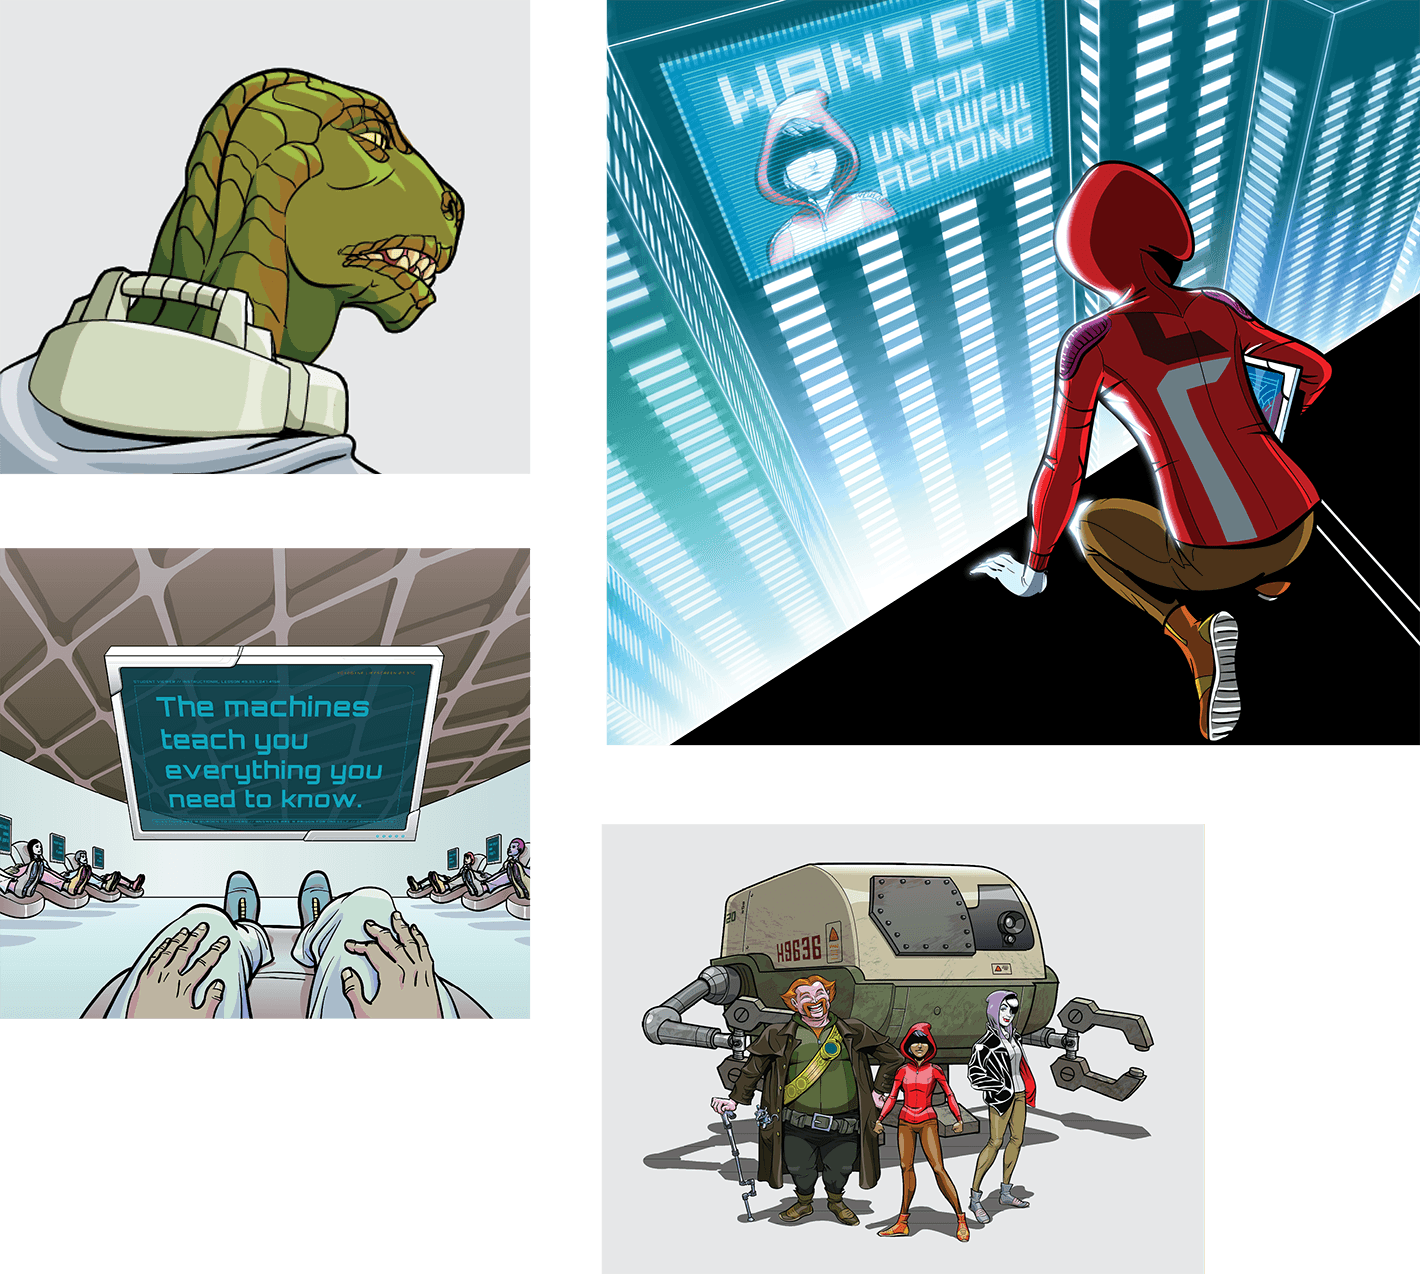 Comic book-style illustration featuring four panels: a close-up of a reptilian character, Spider-Man looking at a 